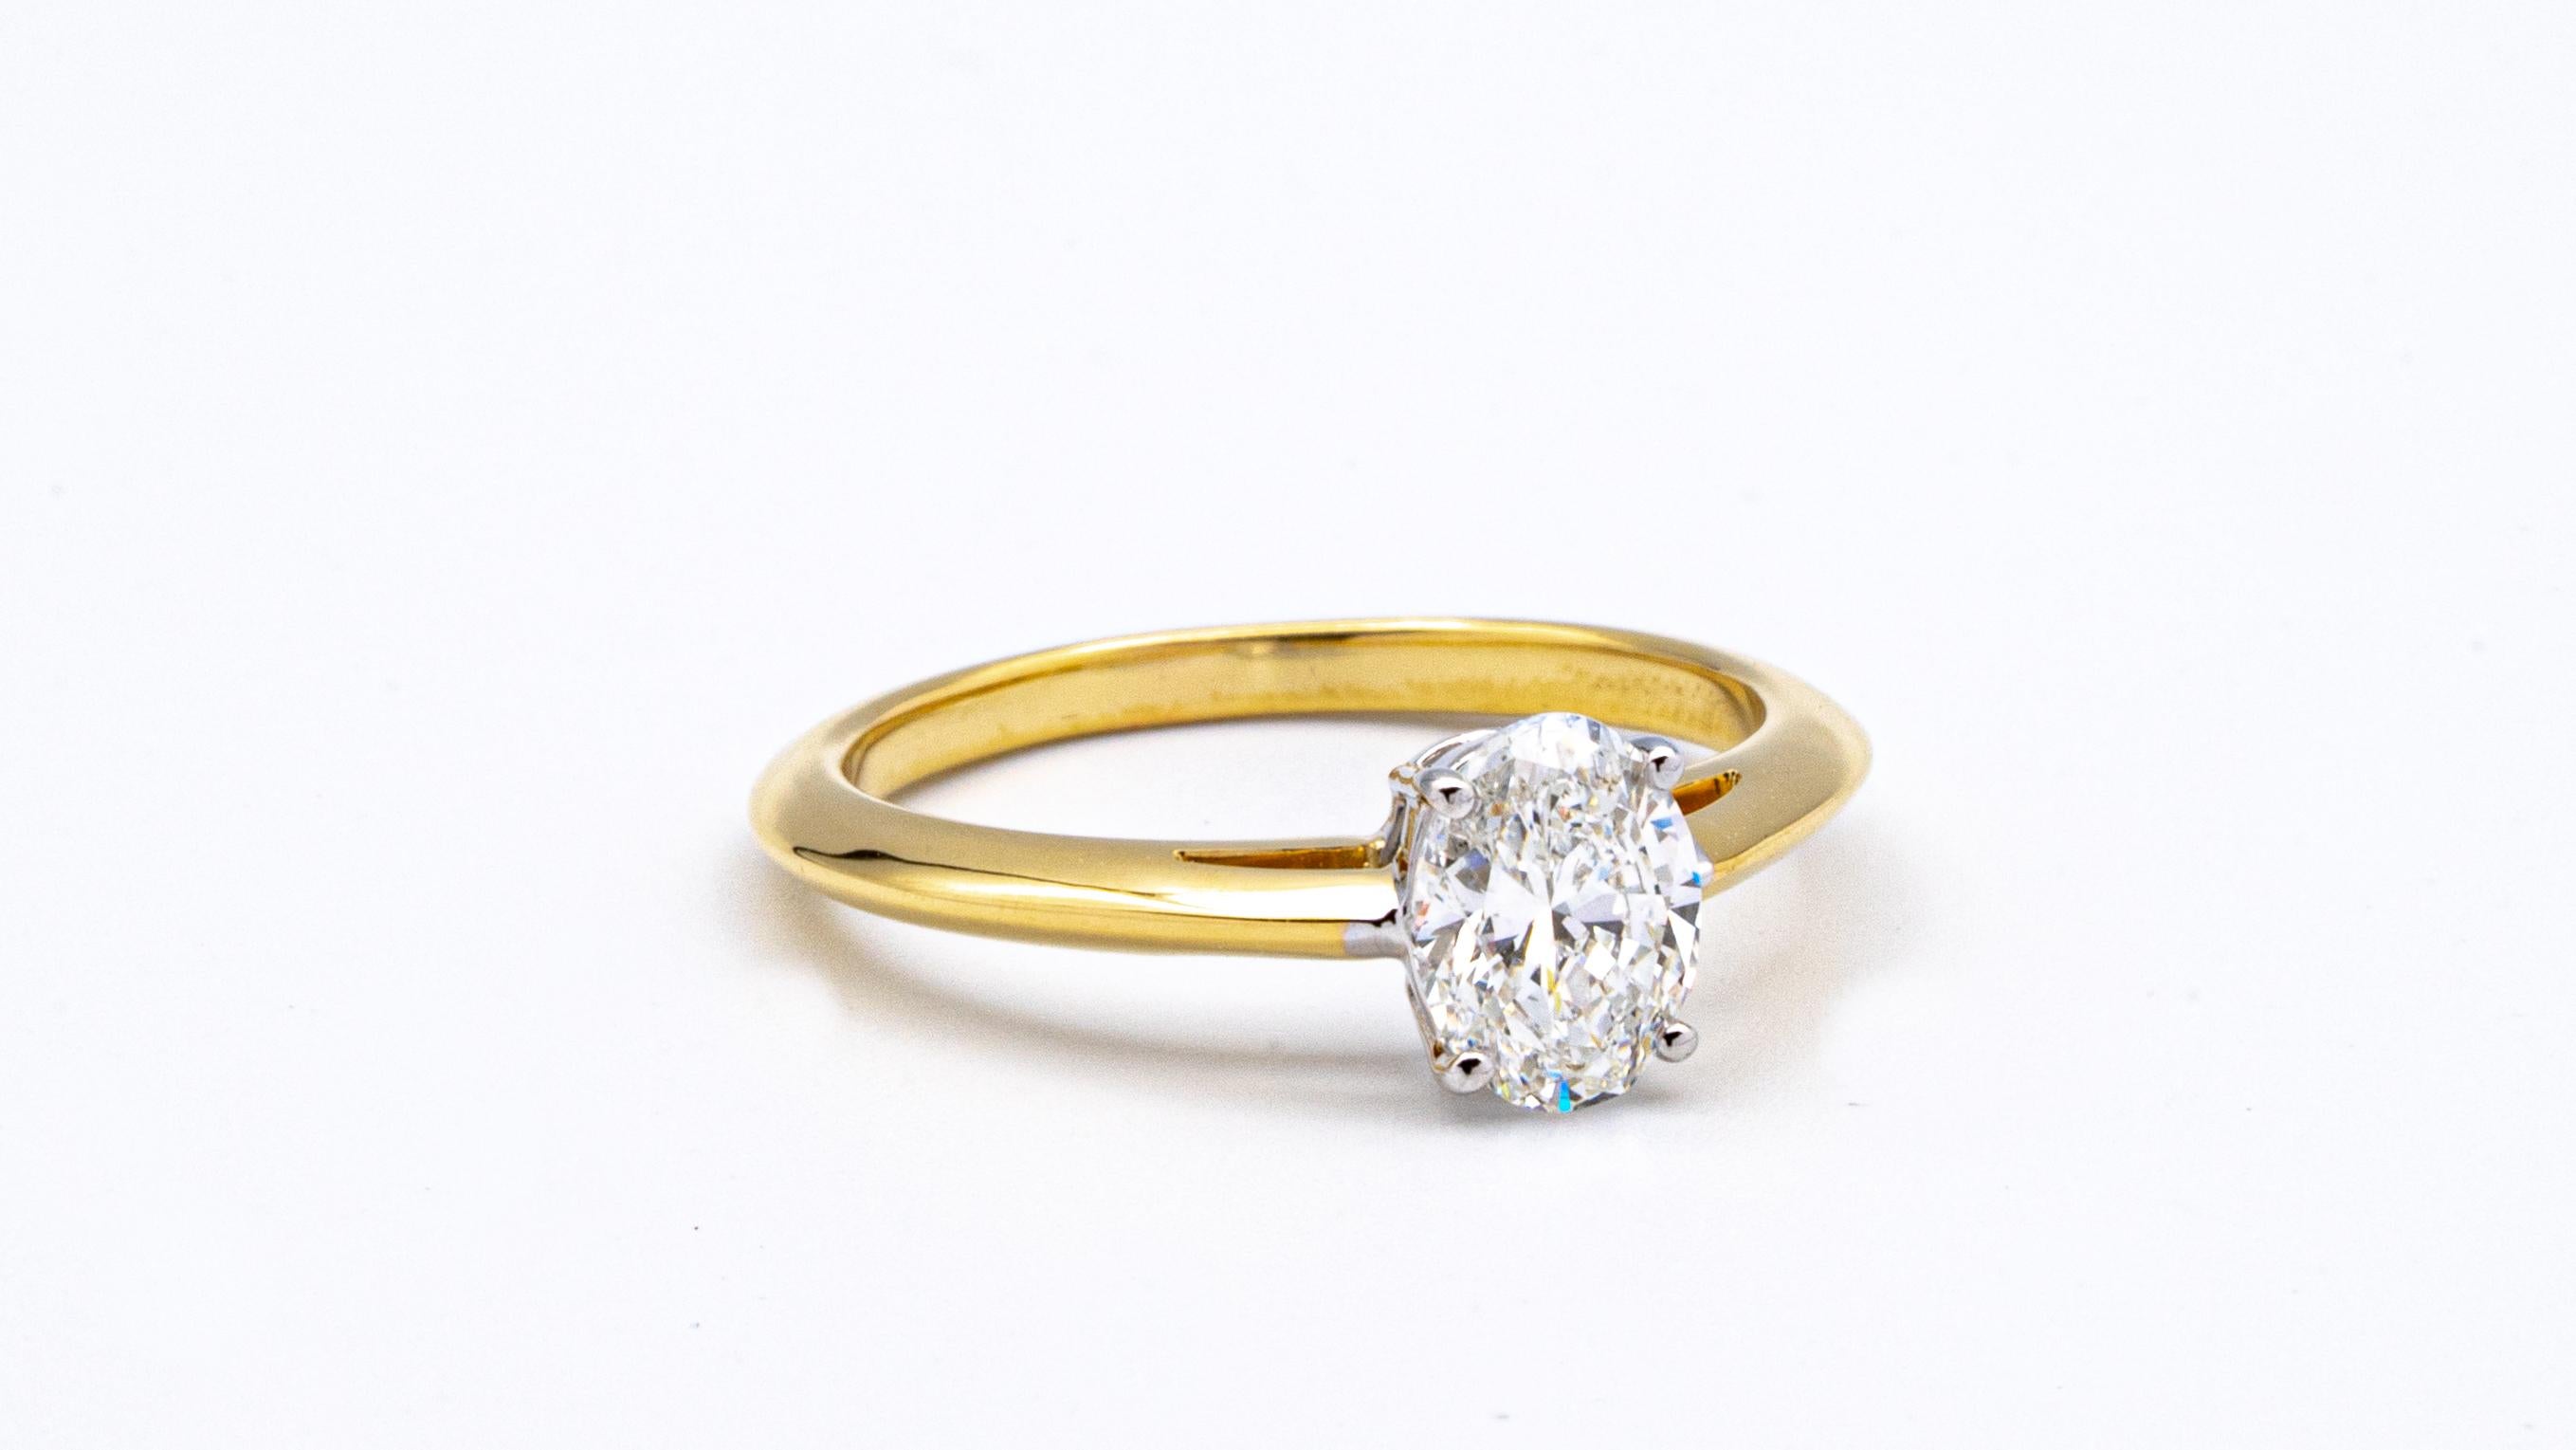 Tiffany & Co. Oval Diamond Engagement with 0.79 carat 